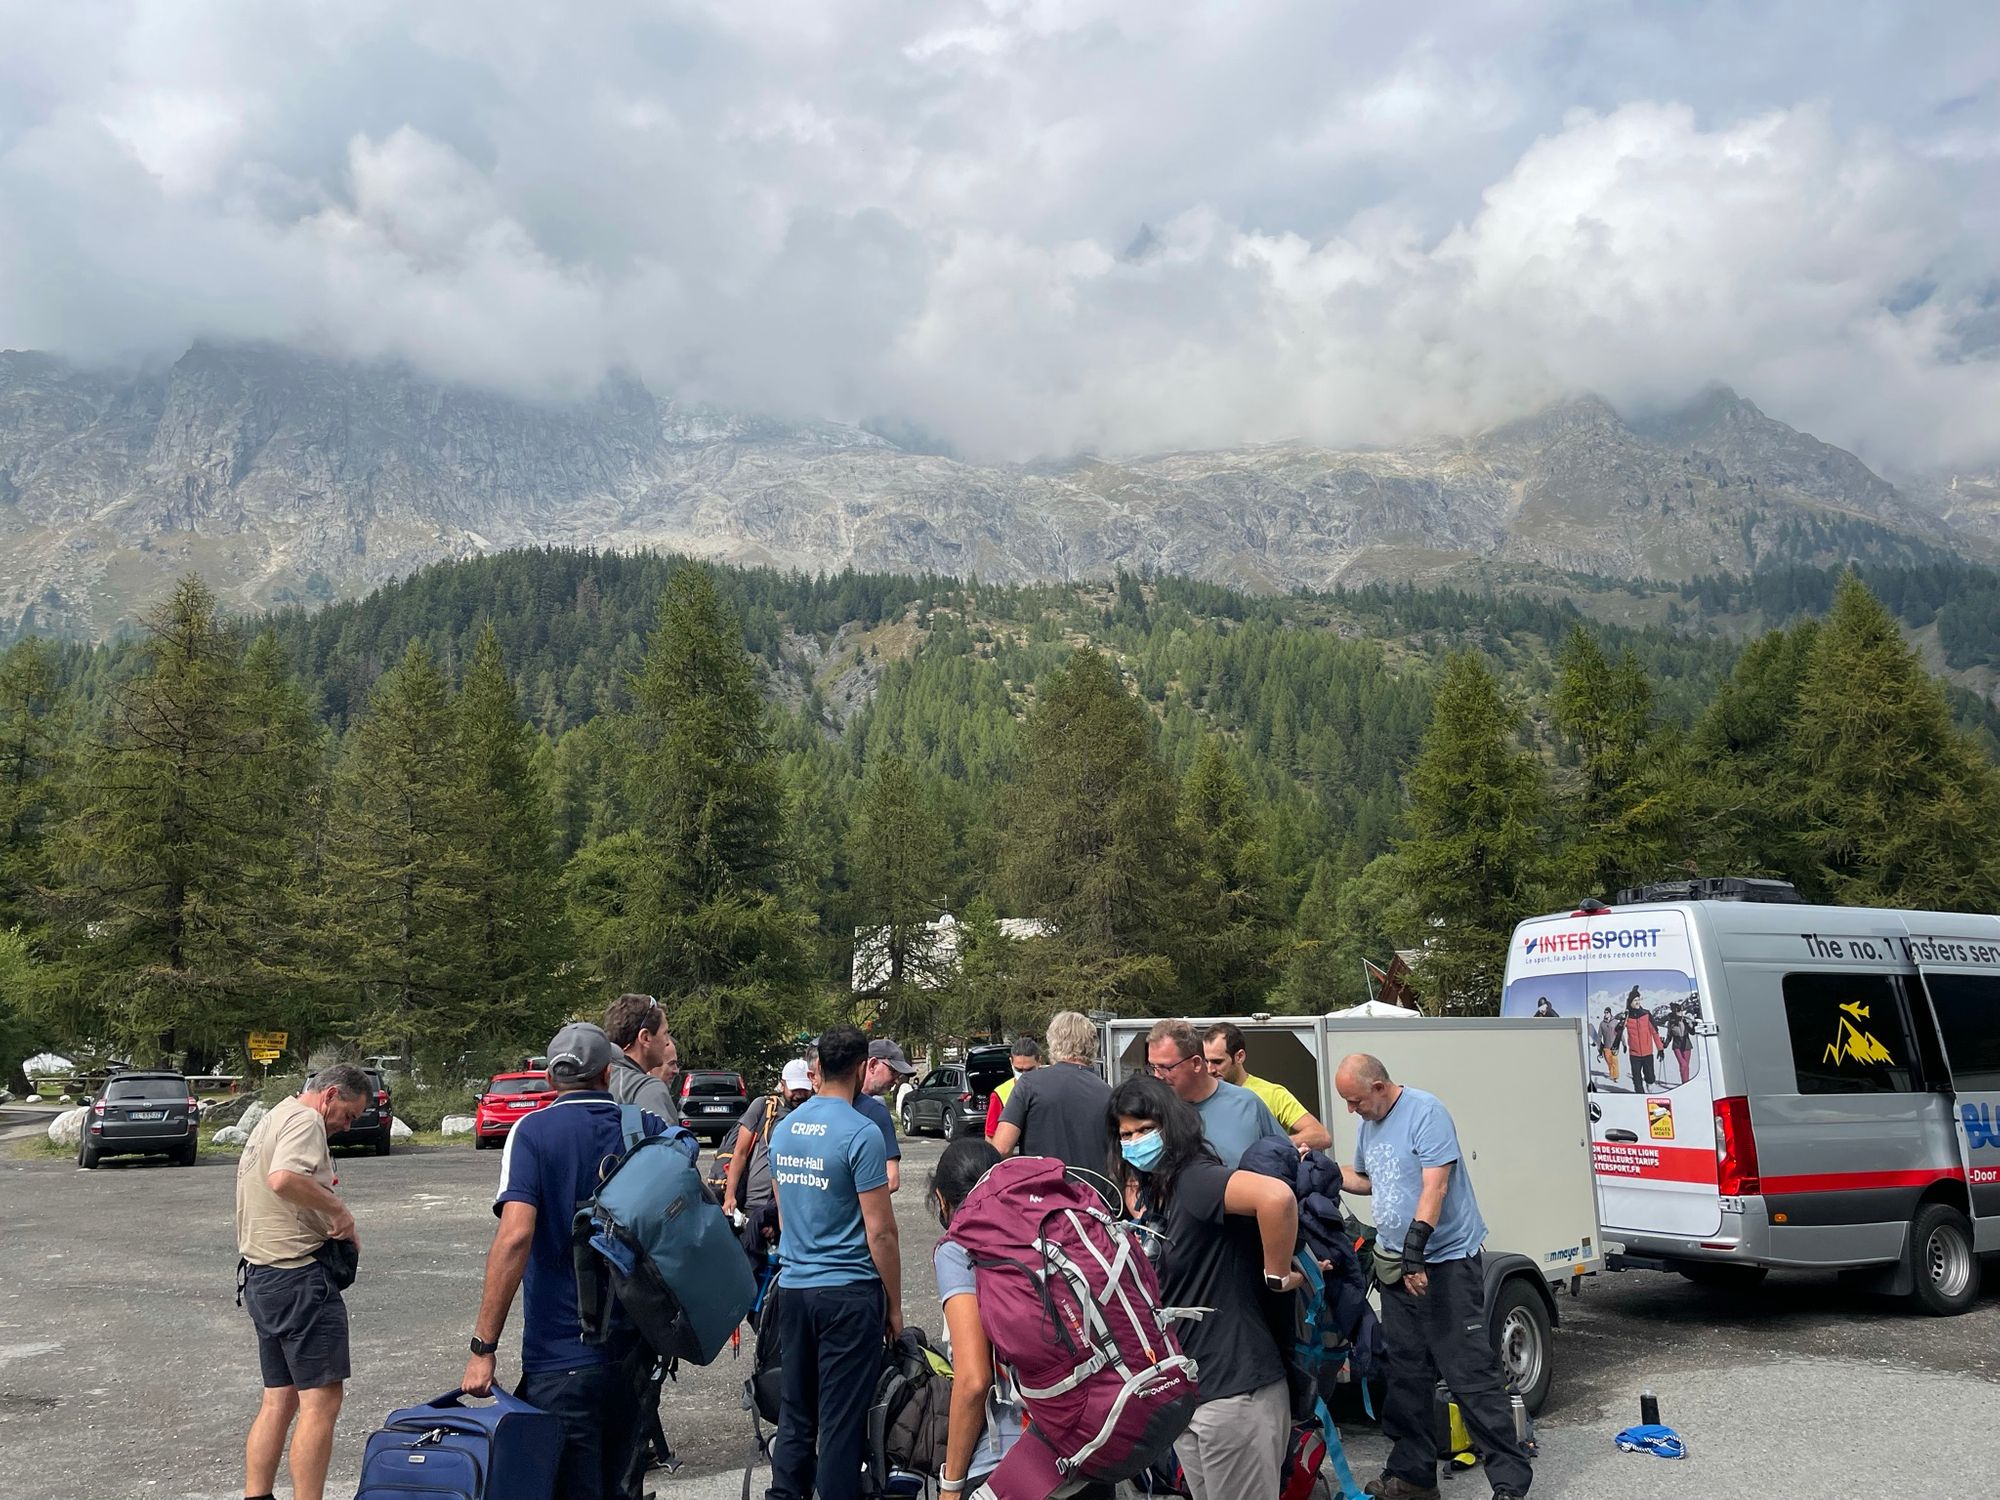 A hiking group arrives at the start point of the Mont Blanc Trek for a final kit check. Photo: Tim Wells